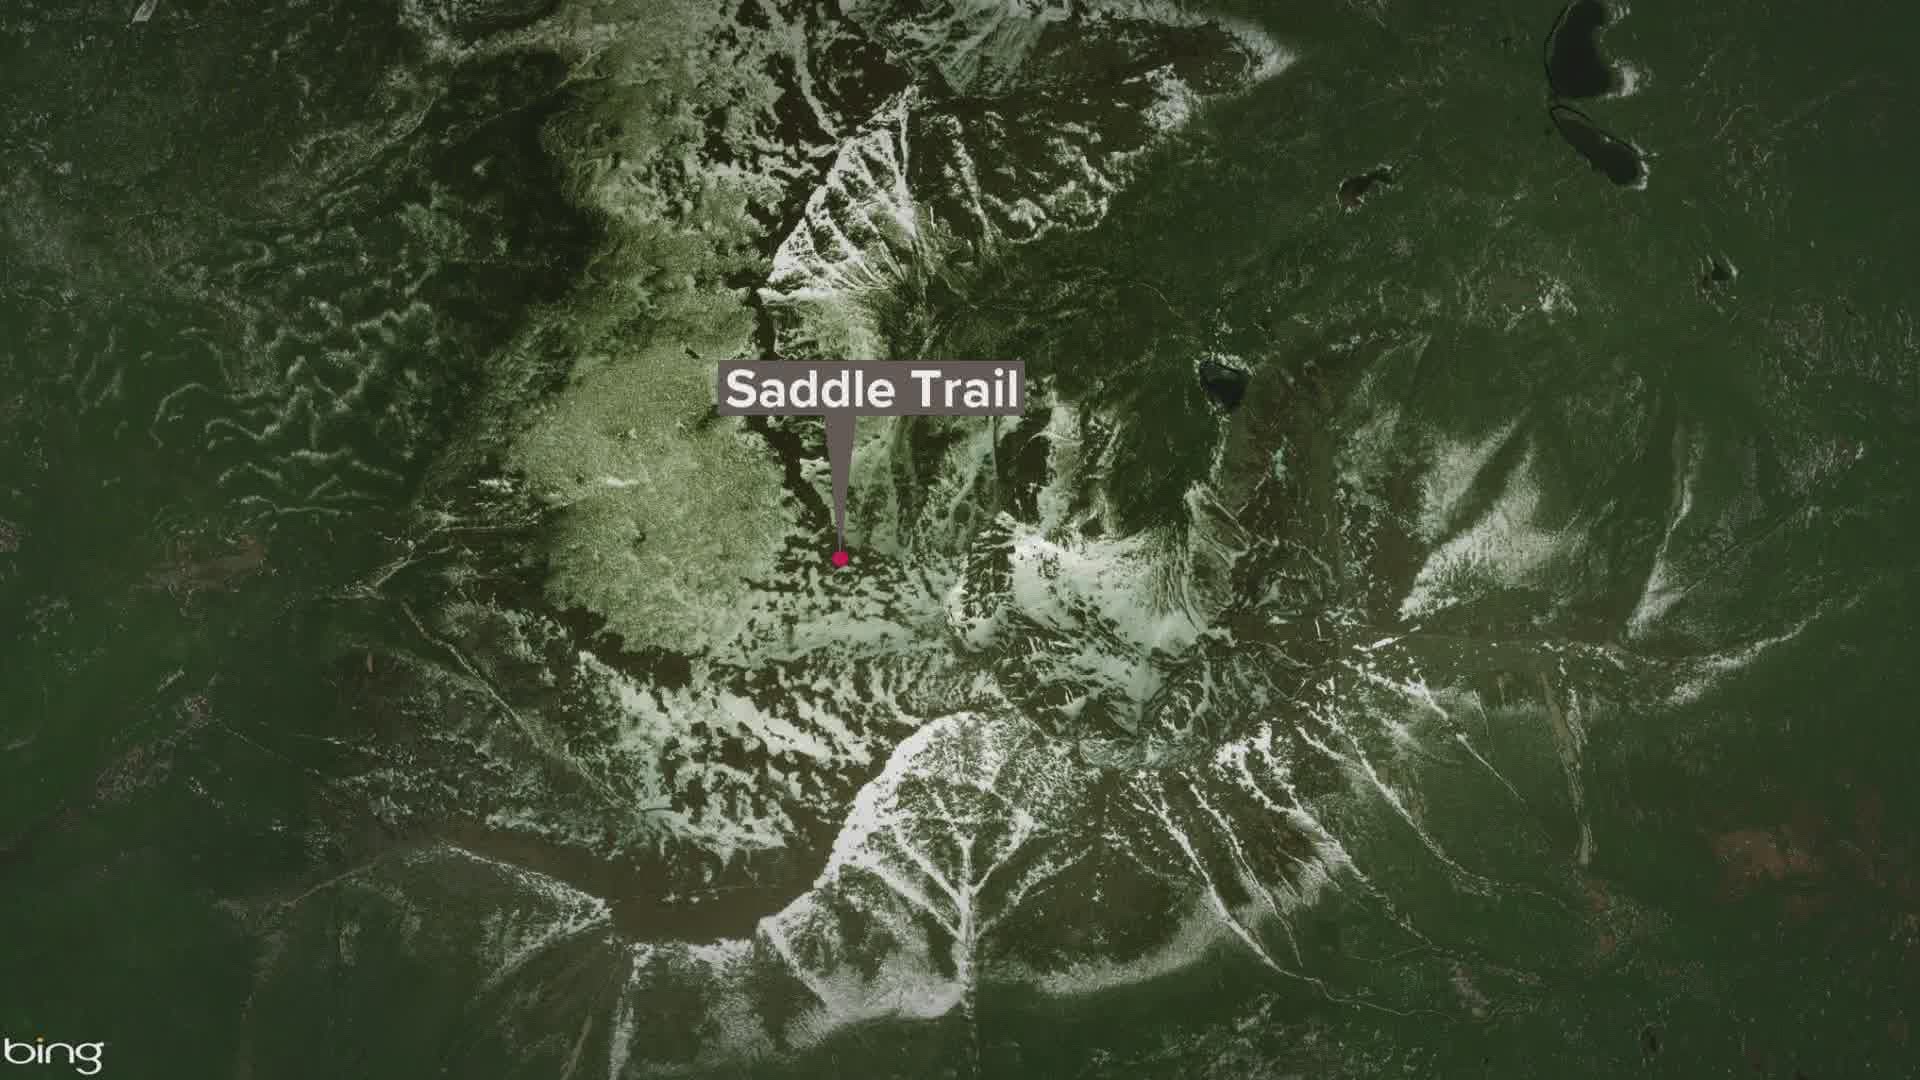 The 55-year-old man from Lewiston fell on Saddle Trail inside the great basin of Katahdin.